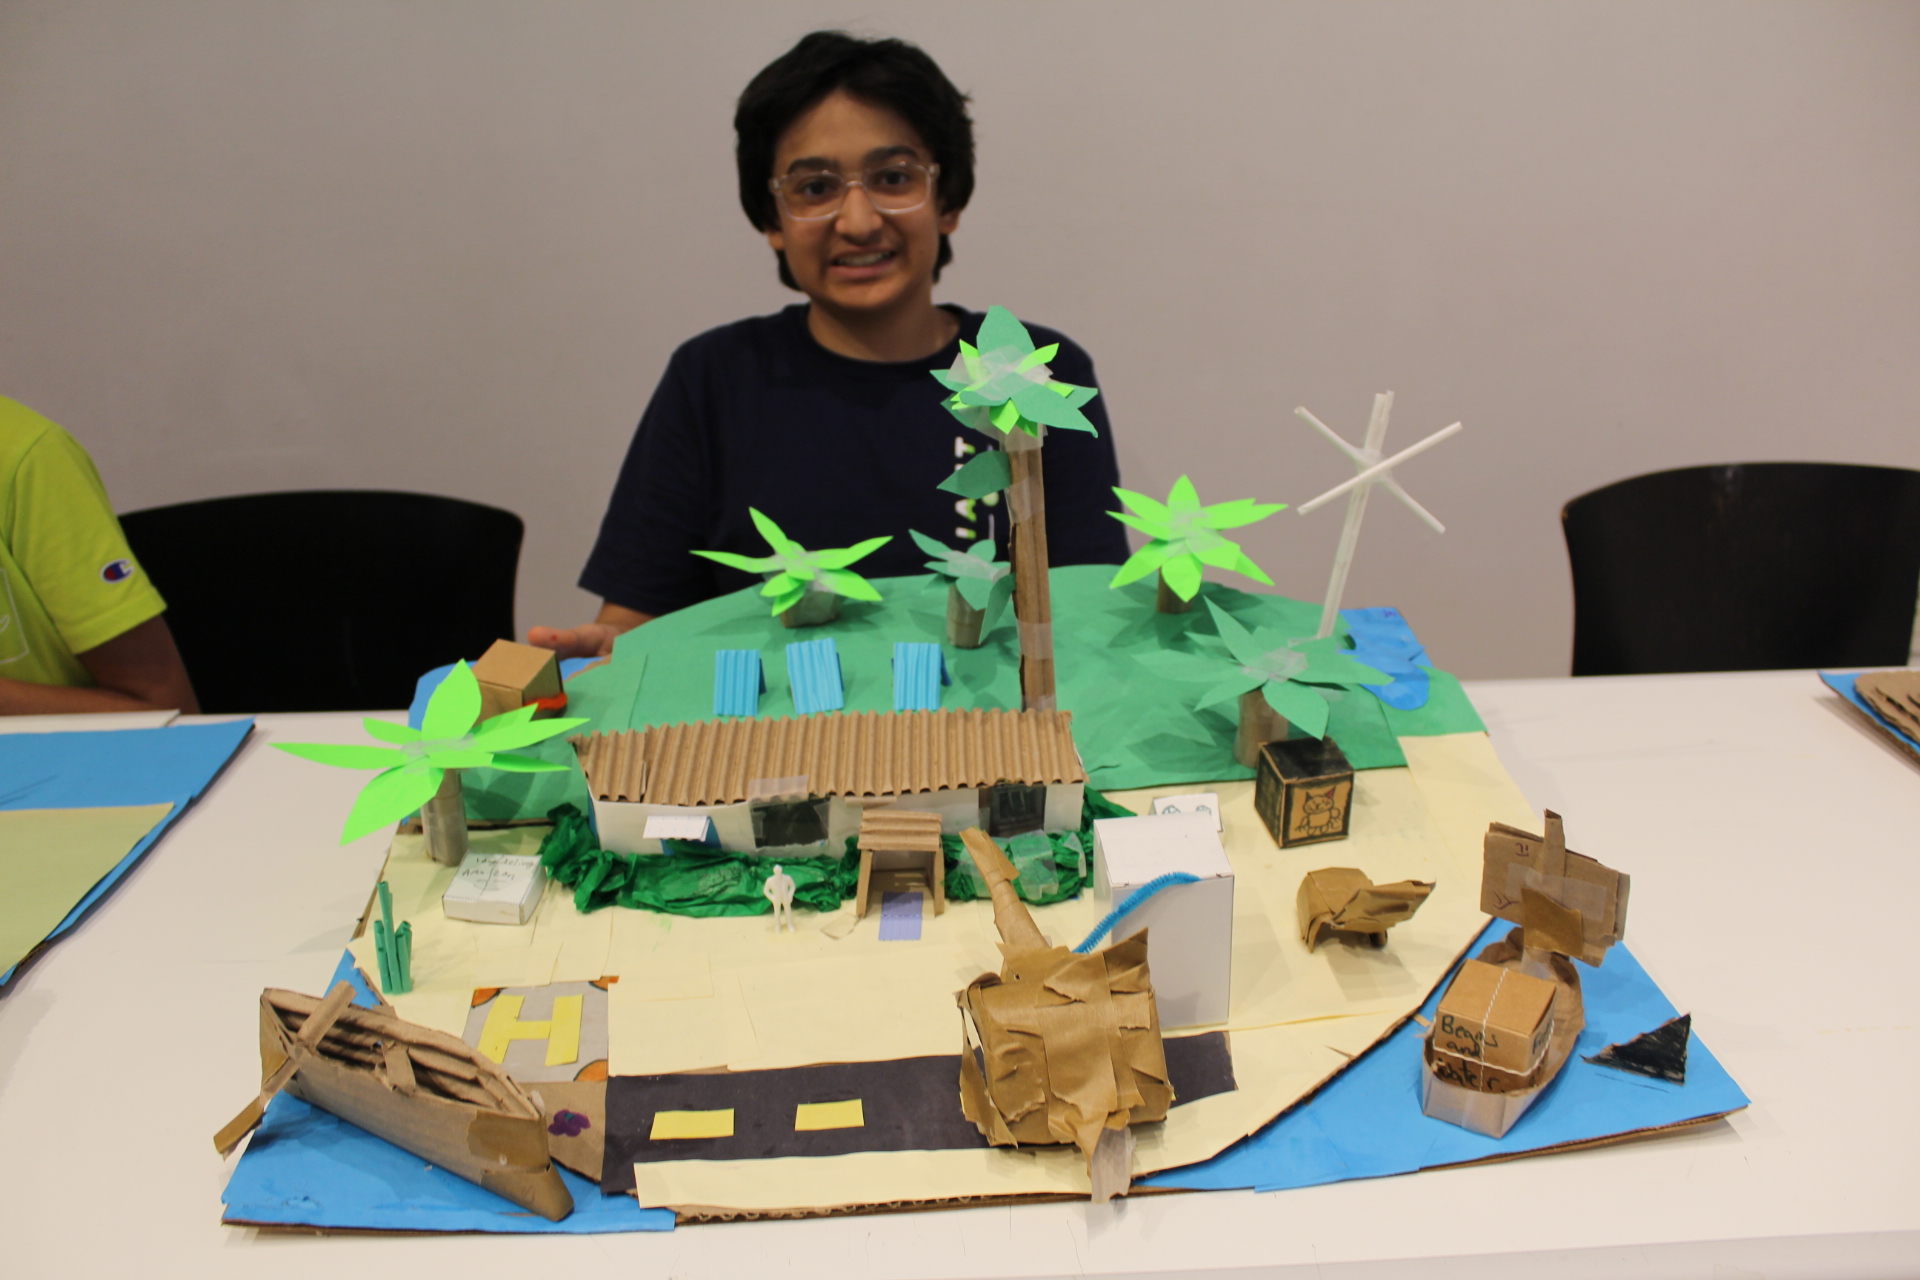 Student with architecture model of an island home